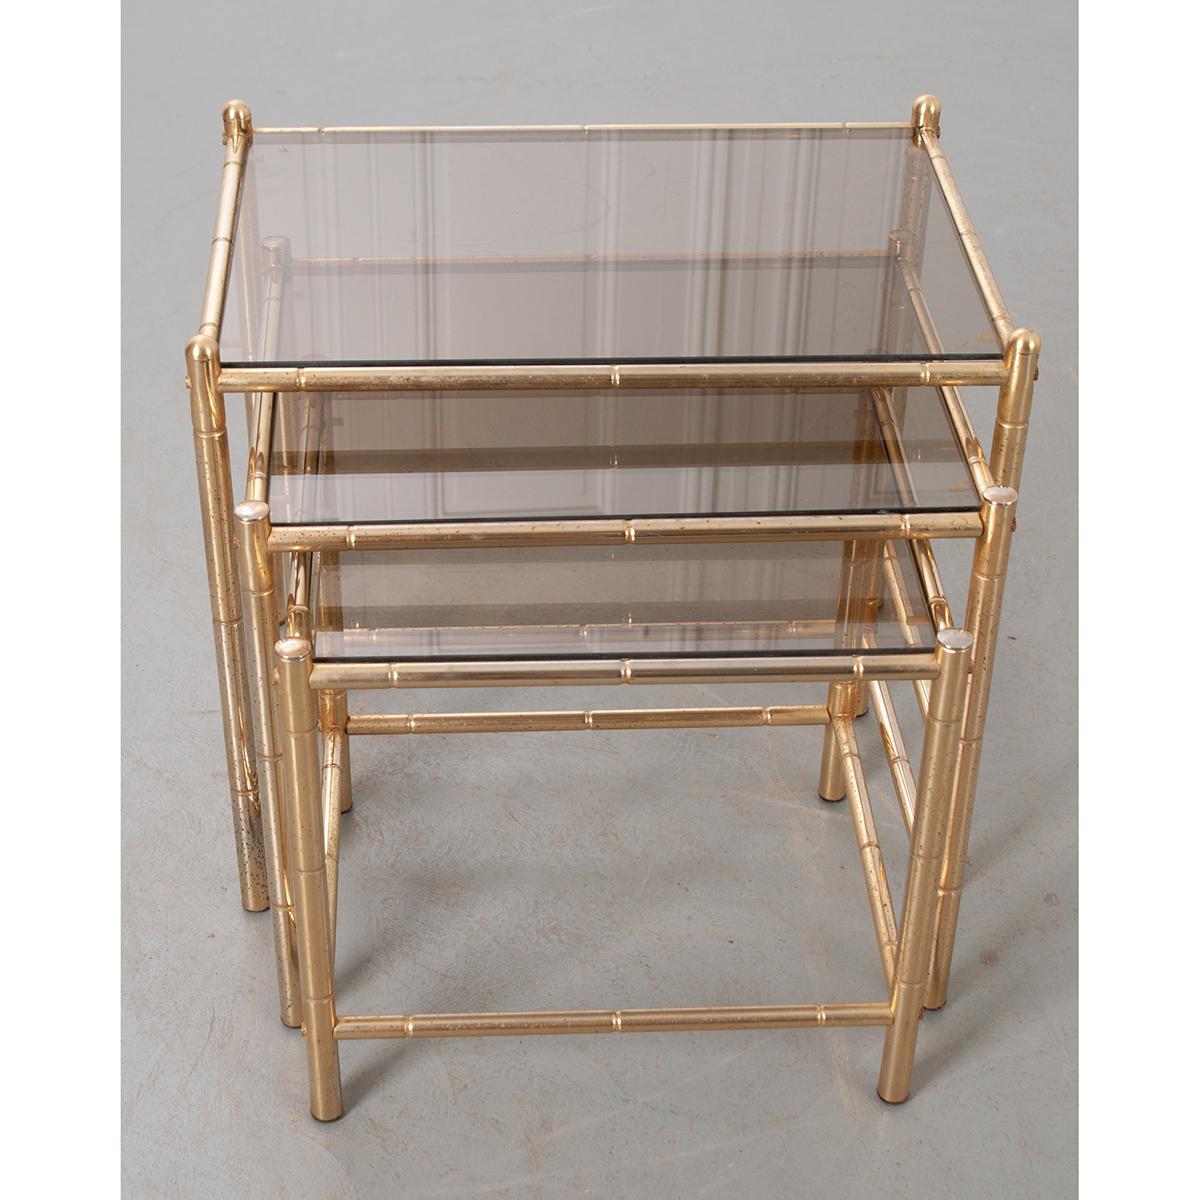 Set of three French, brass nesting tables with inset, tinted glass tops. The brass plated frames are styled to mimic bamboo and have a lustrous metallic finish. The tables conveniently nestle into one another, minimizing their footprint when not in